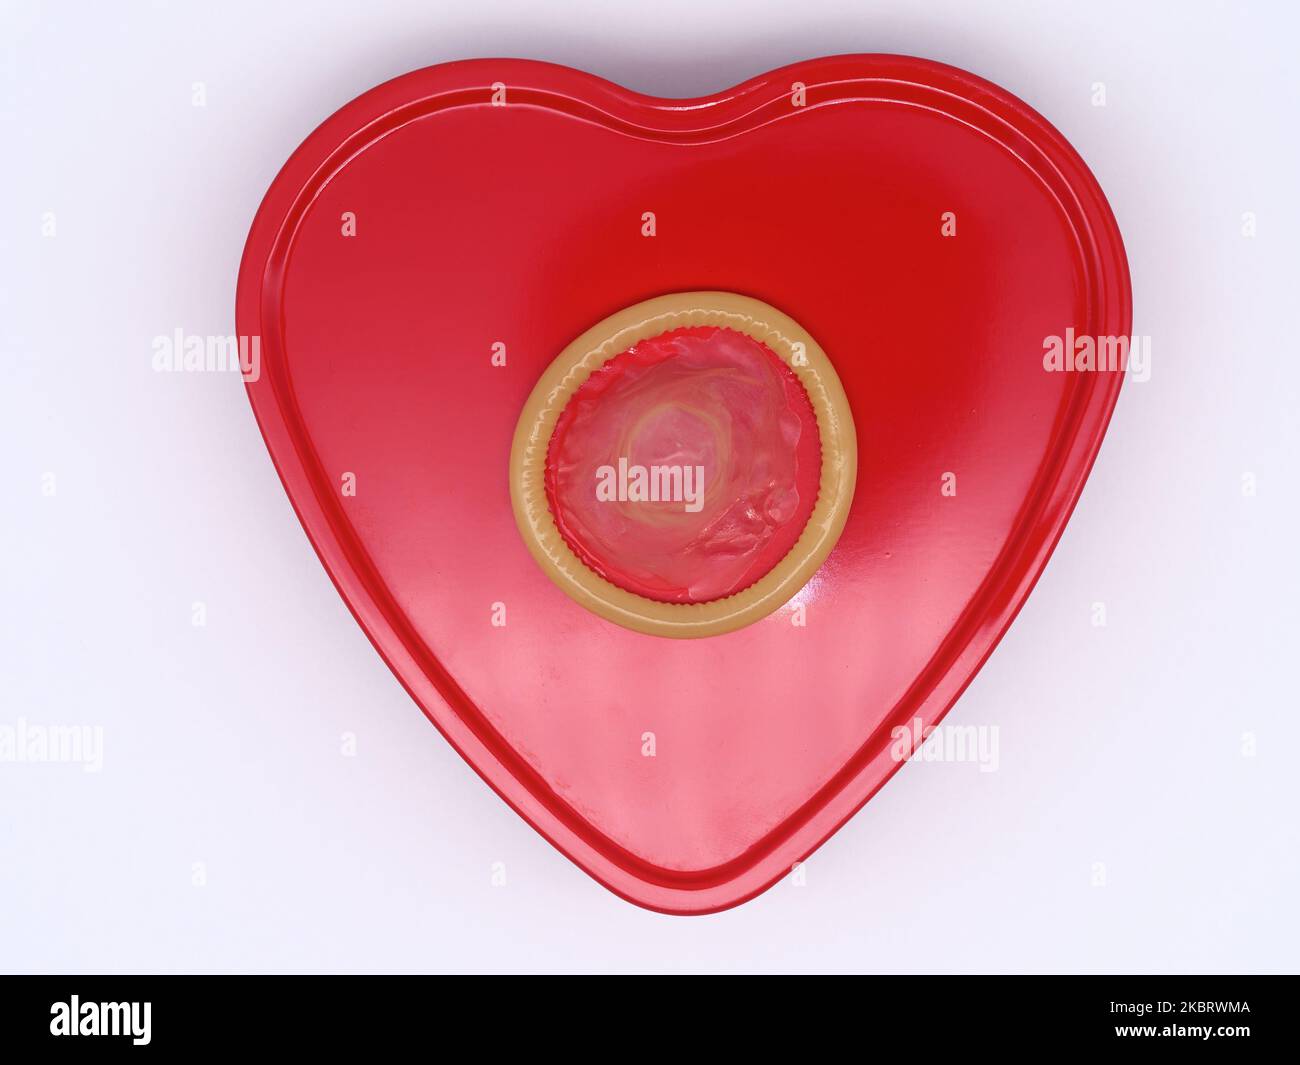 Unwrapped condom on a red heart shape against a white background Stock Photo